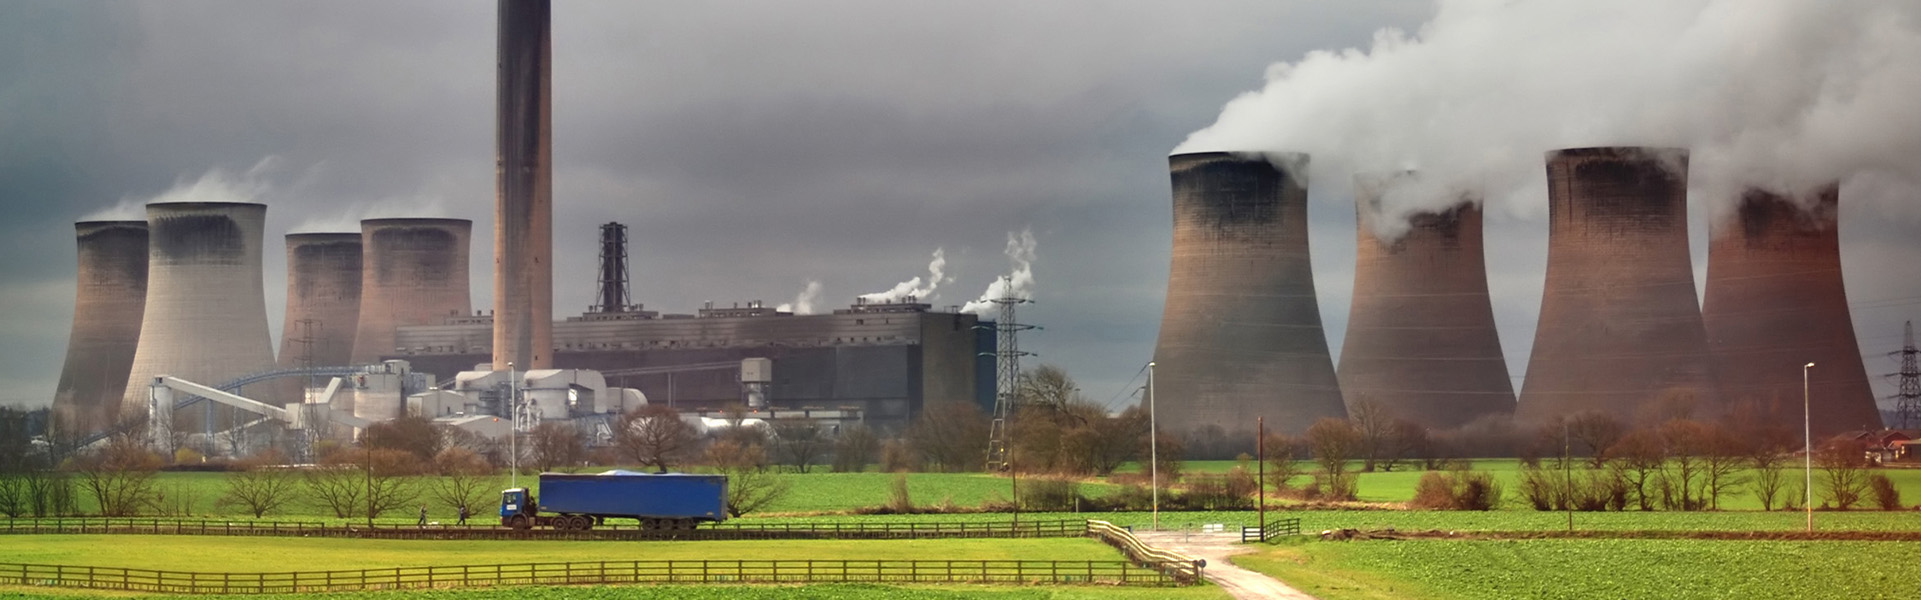 Voldemort causes havoc at Sellafield – nuclear risks and insurance policies